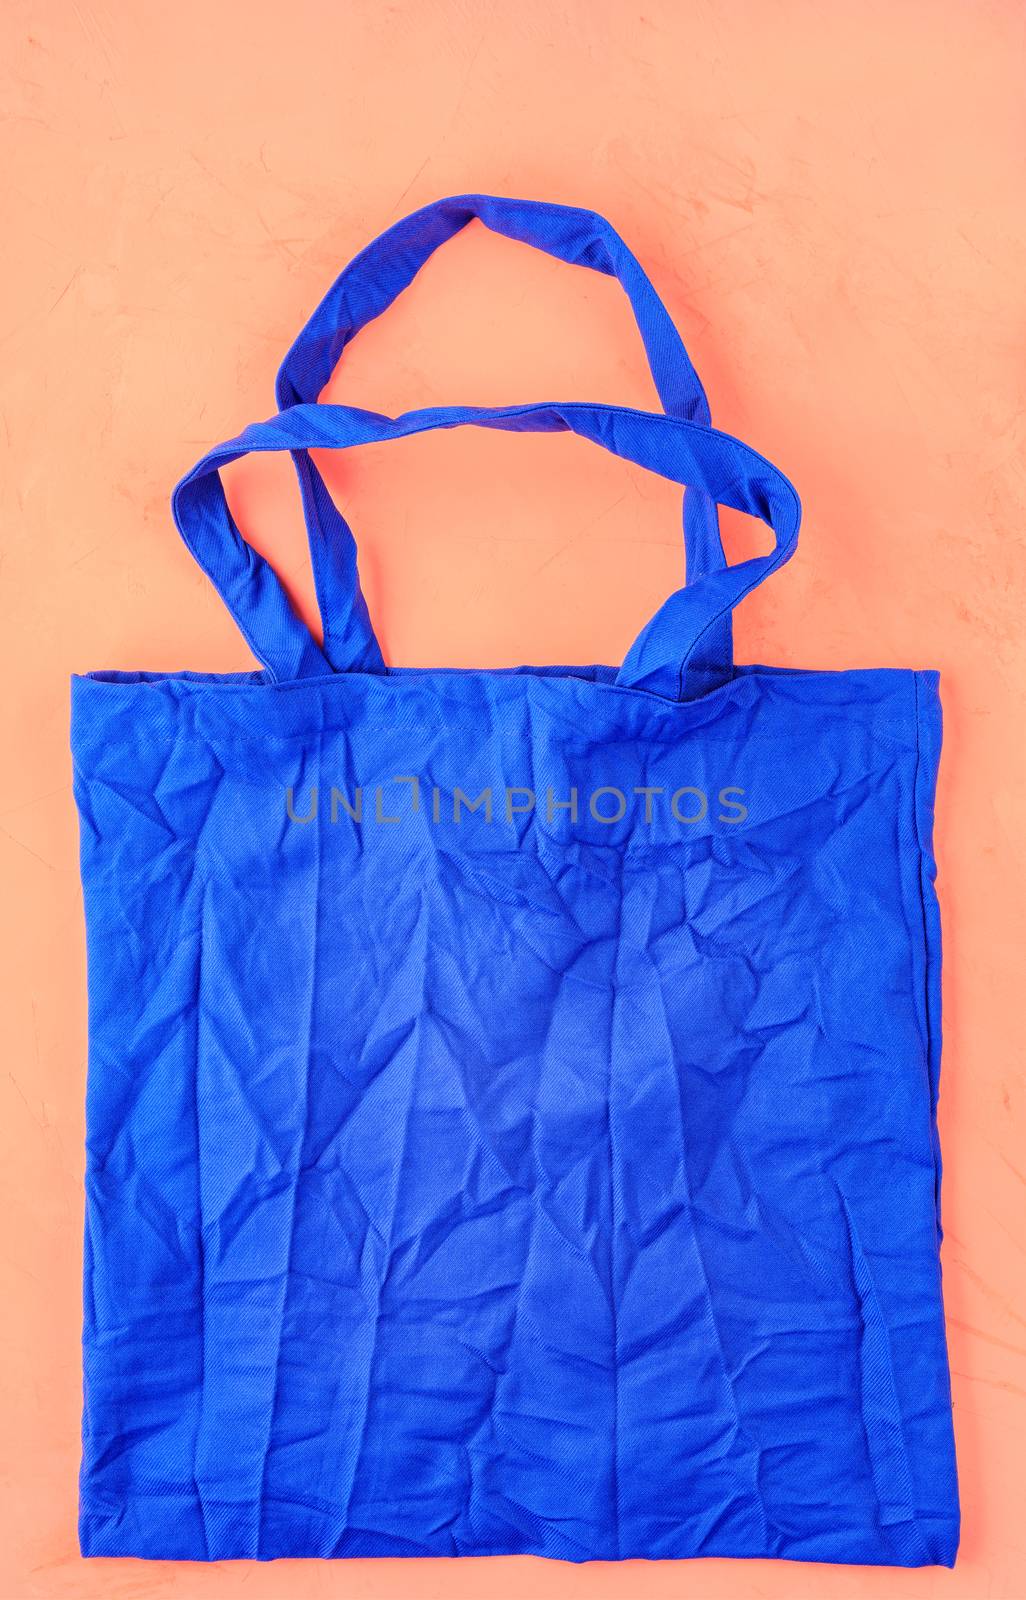 Eco-friendly cotton bag in classic blue color against a peach color background. Zero waste concept, plastic-free, eco-friendly shopping.